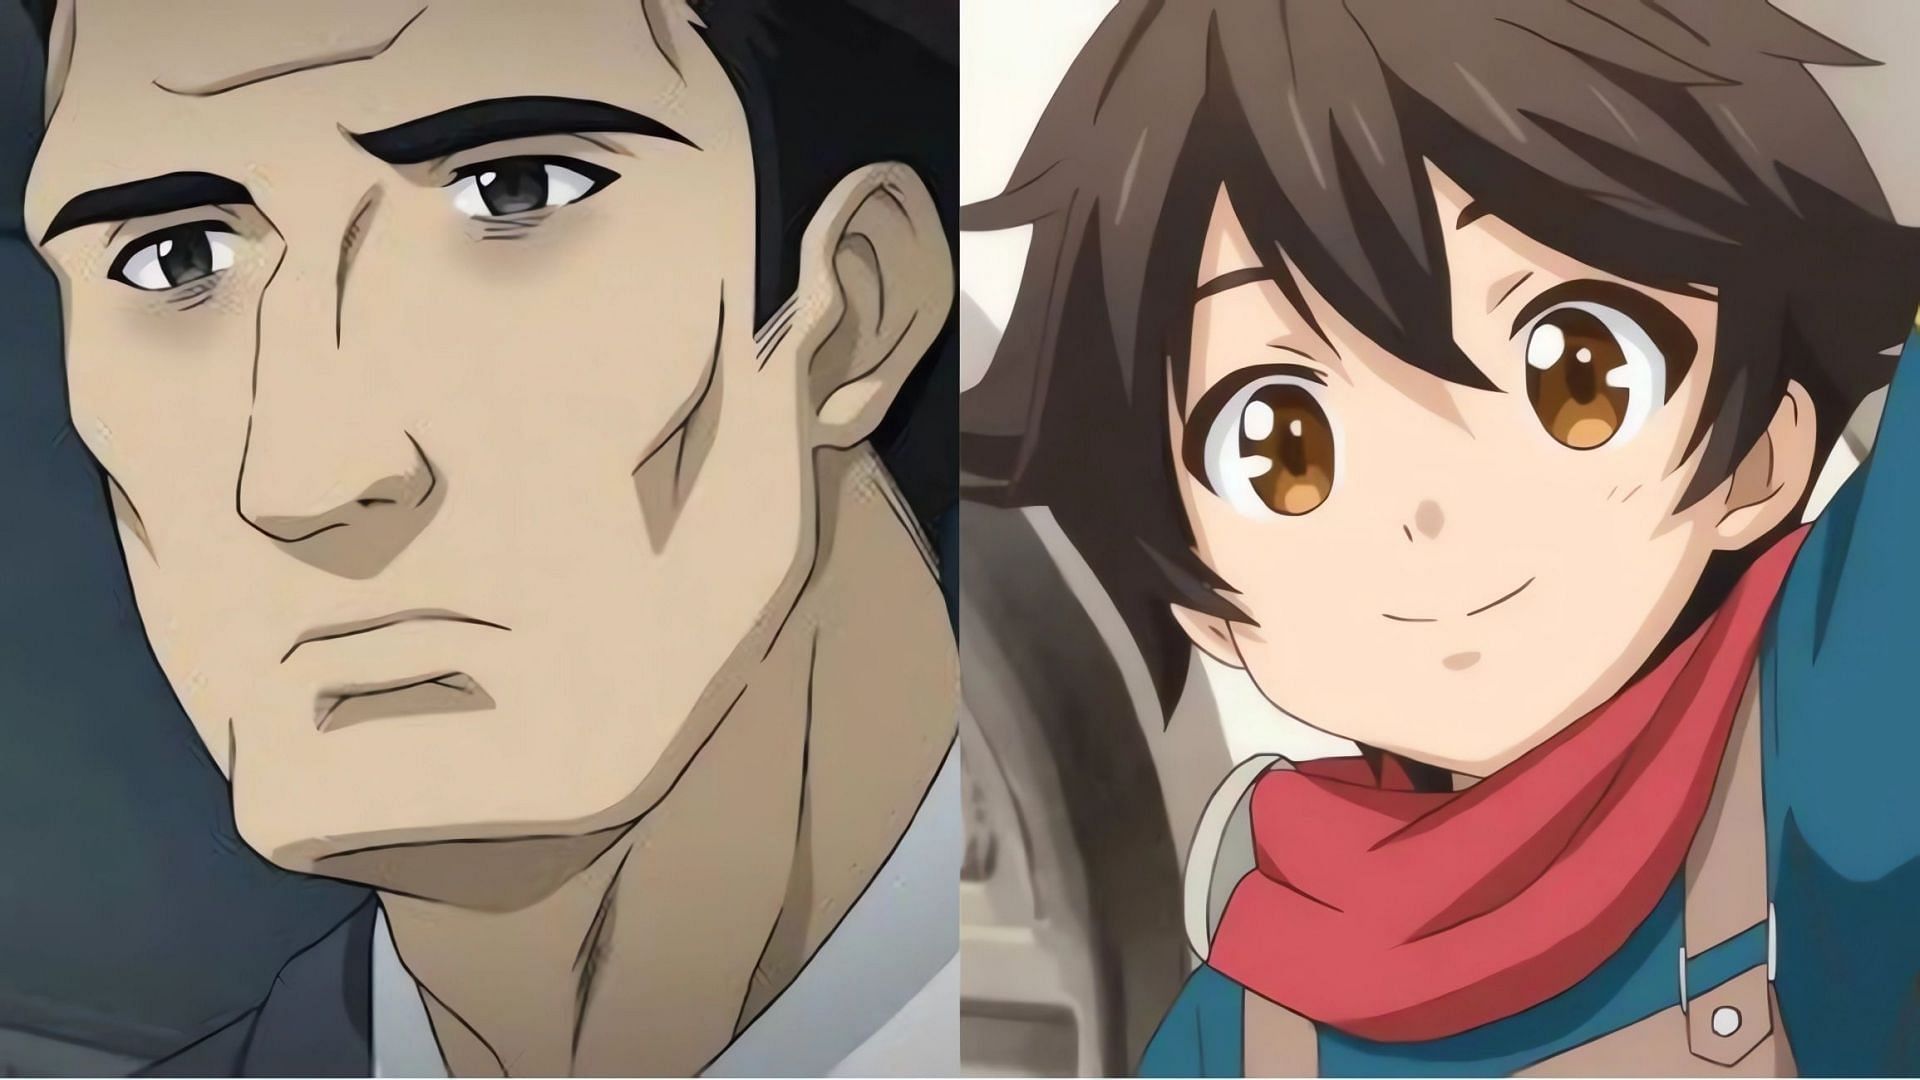 Ryouma as seen in his old life (left) and new life (right) (Image via Maho Film)